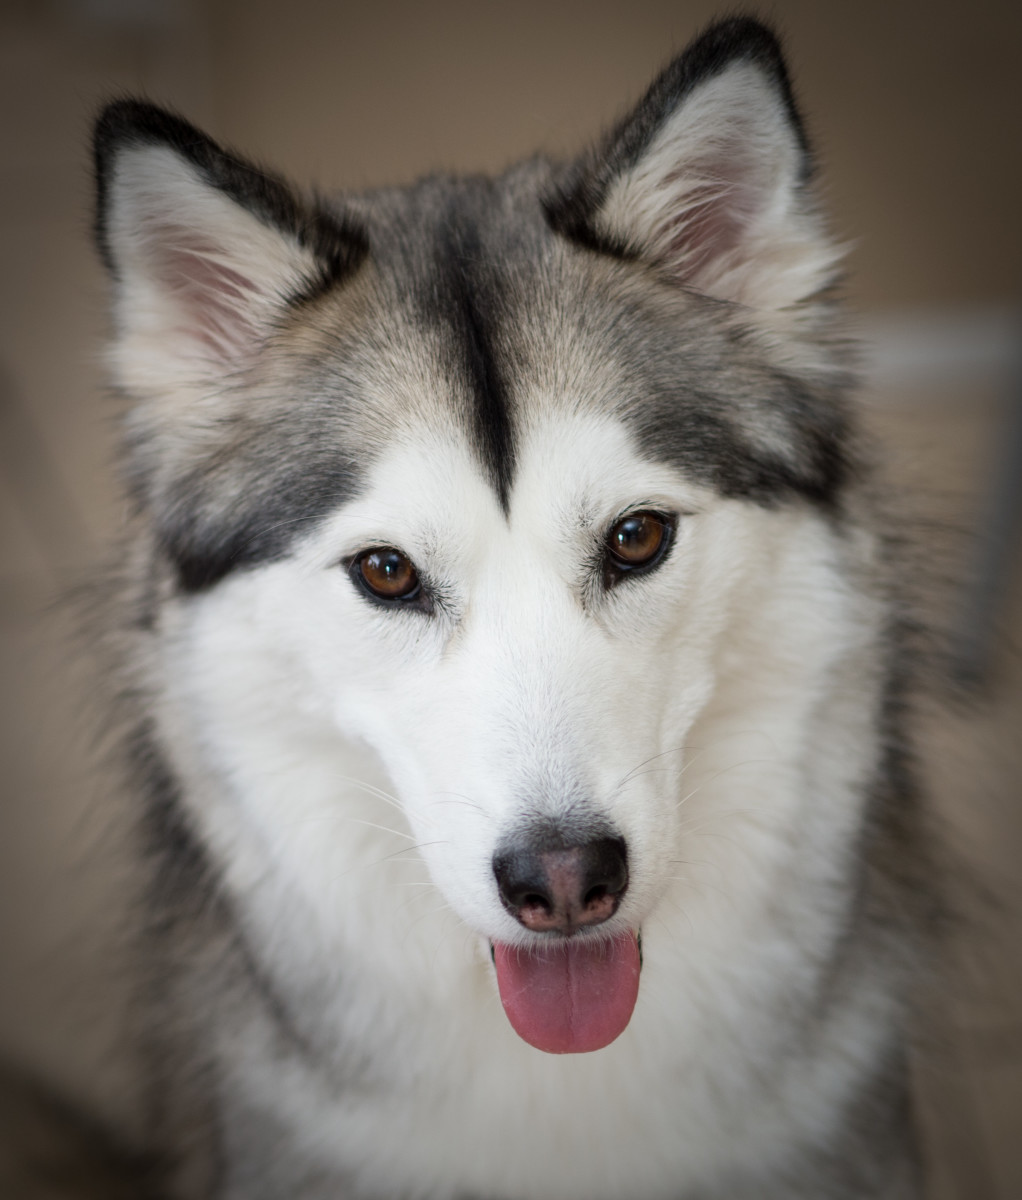 Siberian Huskies are friendly and make great house dogs.